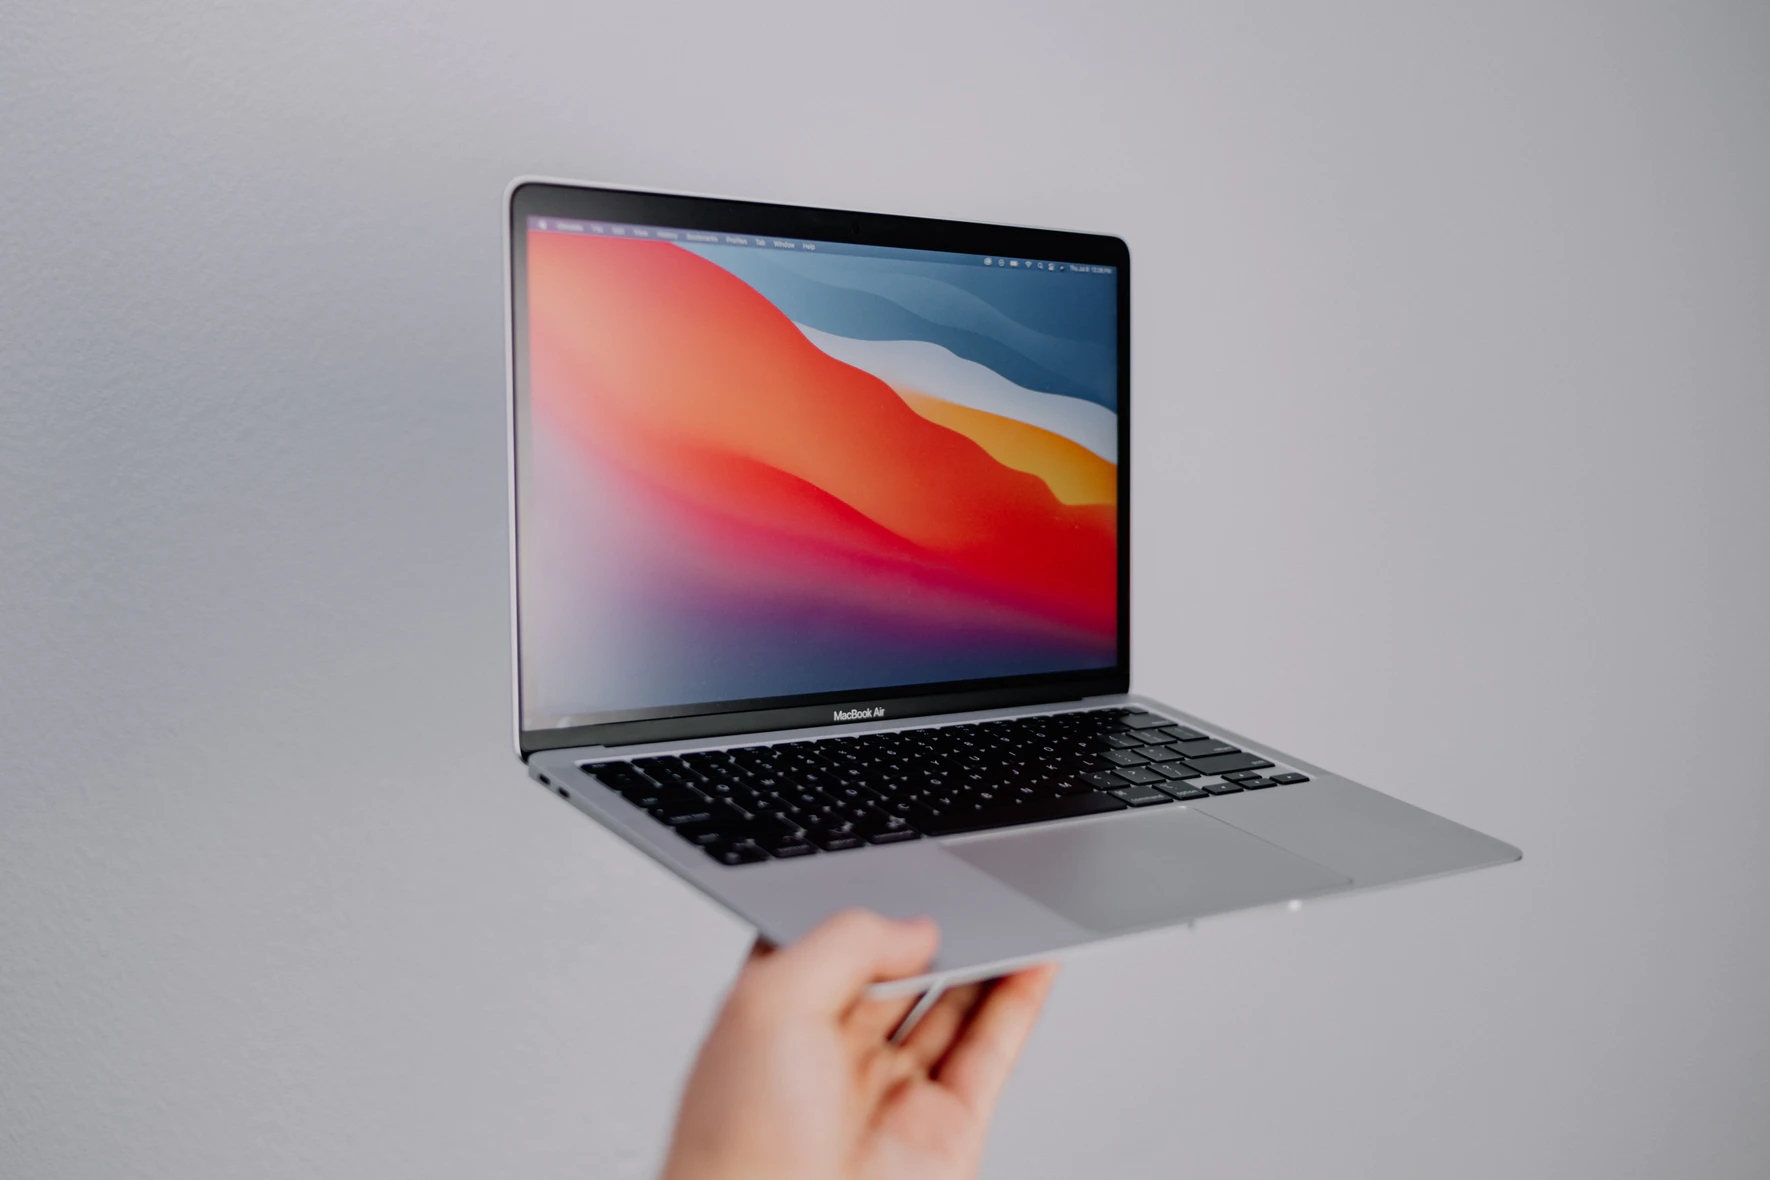 Rumoured 15-inch Apple MacBook may not arrive under the MacBook Air banner  - NotebookCheck.net News